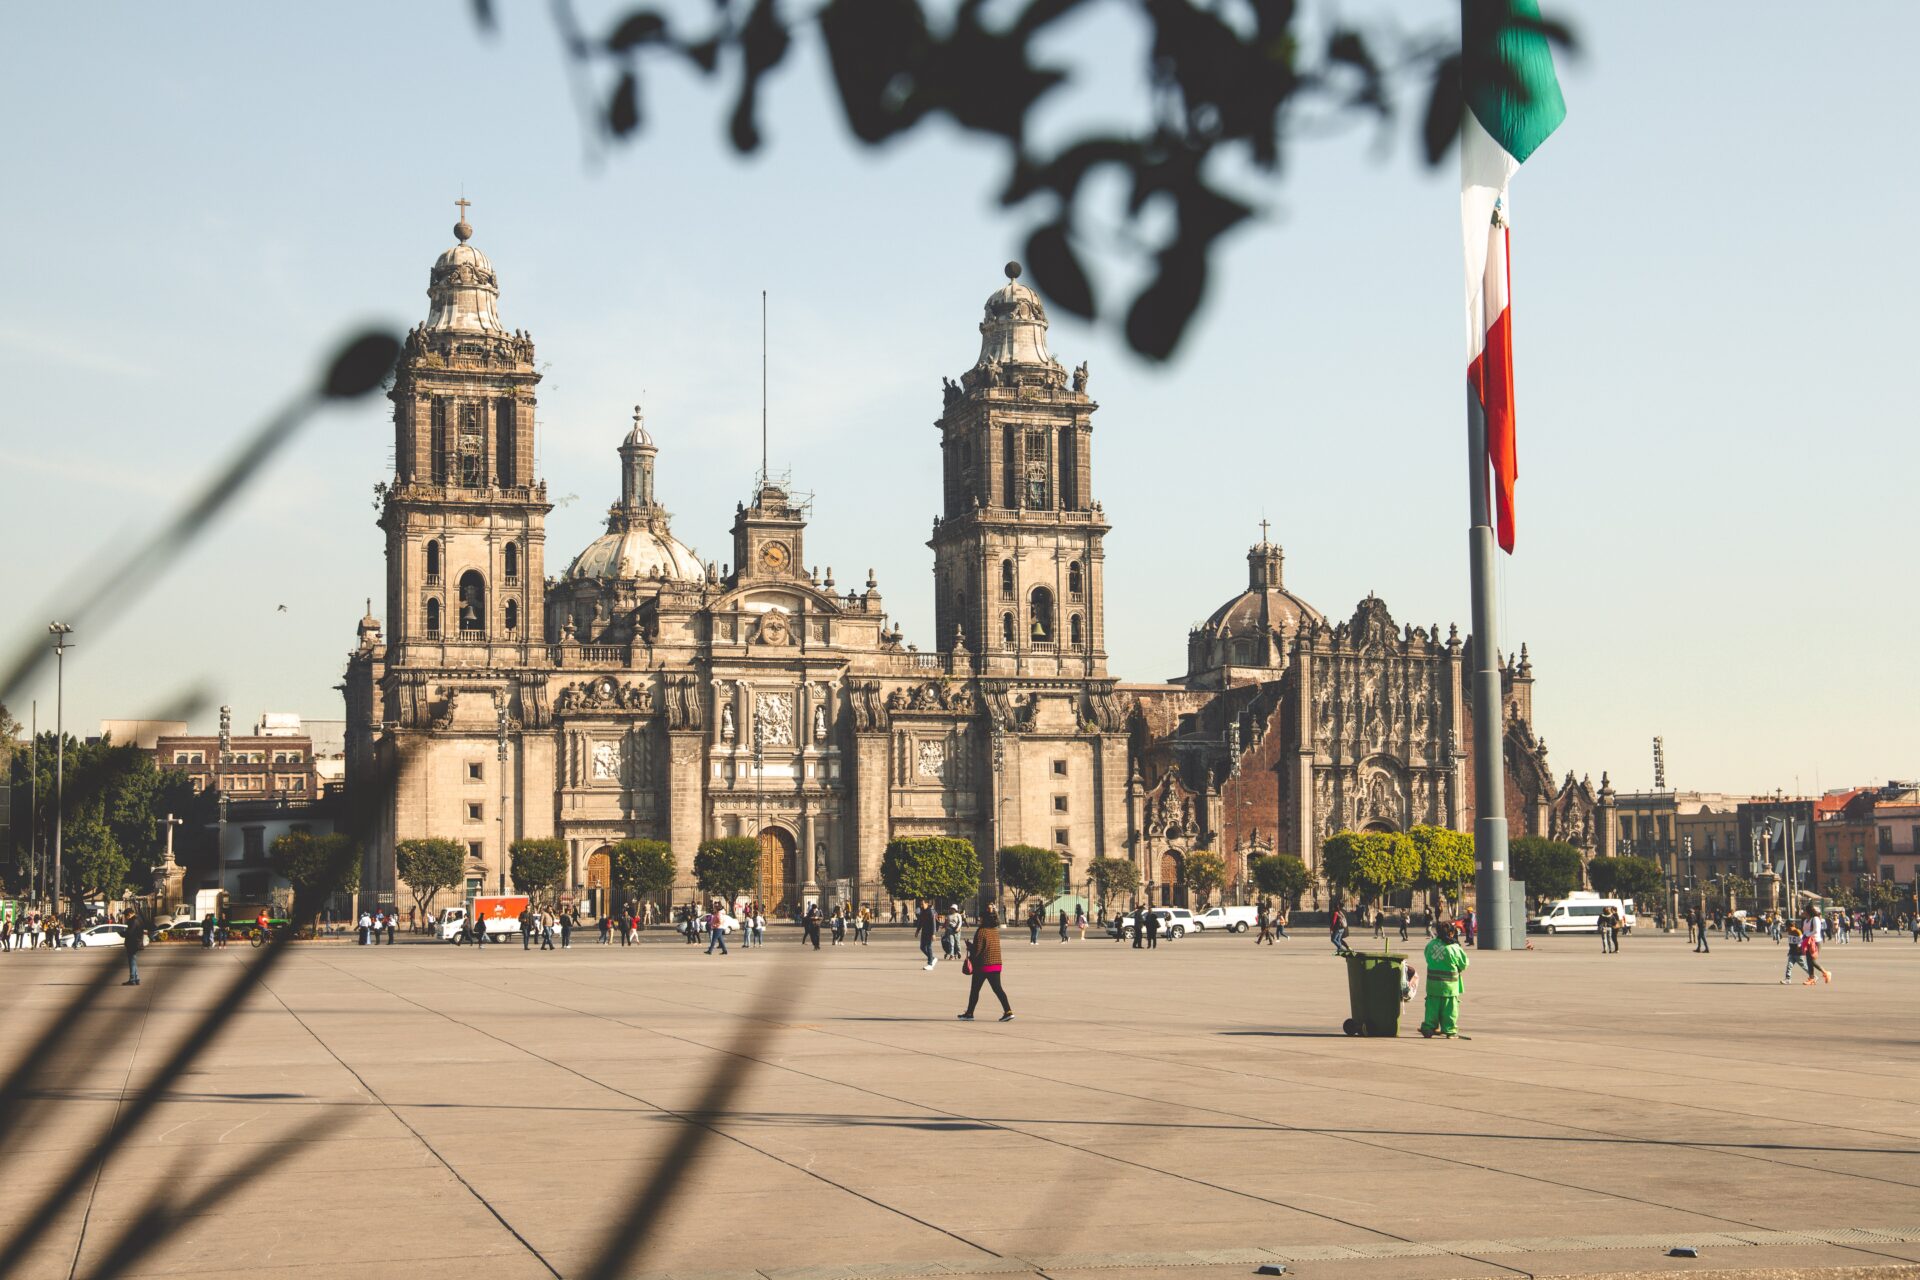 A local's guide to Mexico City | A view of the colonial style cathedral in Mexico City's central square, or Zocalo